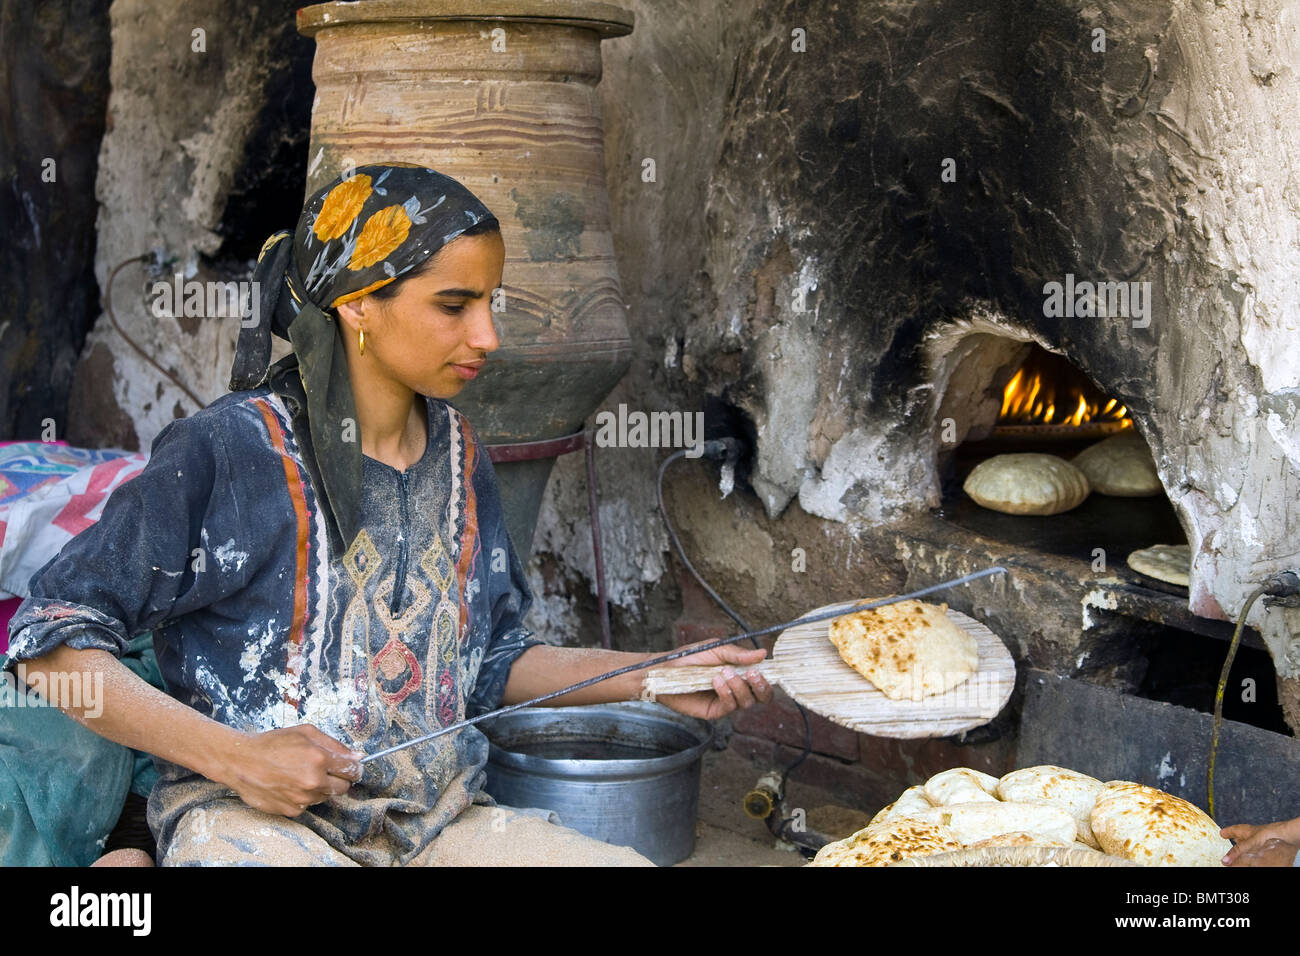 Woman baking bread in a traditional fire in Cairo, Egypt Stock Photo